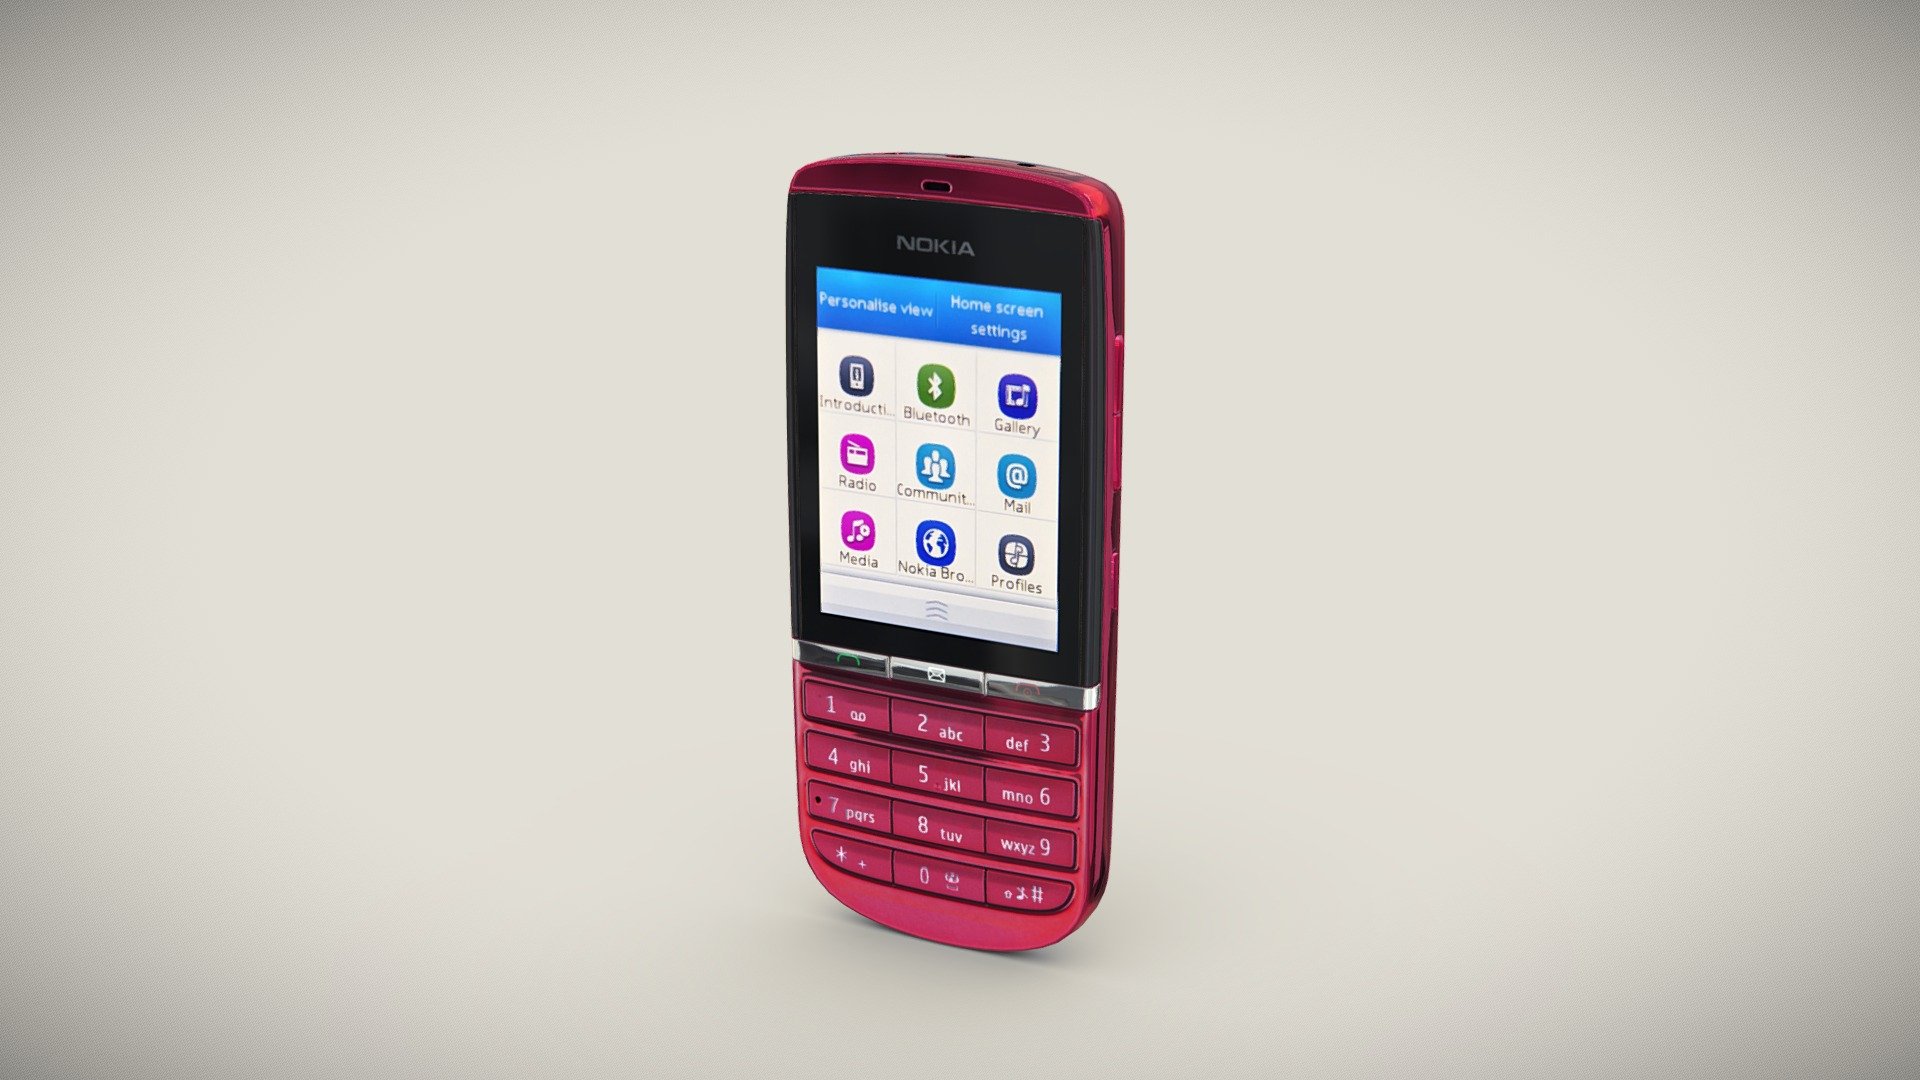 •   Let me present to you high-quality low-poly 3D model Nokia Asha 300 Pink. Modeling was made with ortho-photos of real phone that is why all details of design are recreated most authentically.

•    This model consists of one mesh, it is low-polygonal and it has only one material.

•   The total of the main textures is 5. Resolution of all textures is 4096 pixels square aspect ratio in .png format. Also there is original texture file .PSD format in separate archive.

•   Polygon count of the model is – 2057.

•   The model has correct dimensions in real-world scale. All parts grouped and named correctly.

•   To use the model in other 3D programs there are scenes saved in formats .fbx, .obj, .DAE, .max (2010 version).

Note: If you see some artifacts on the textures, it means compression works in the Viewer. We recommend setting HD quality for textures. But anyway, original textures have no artifacts 3d model